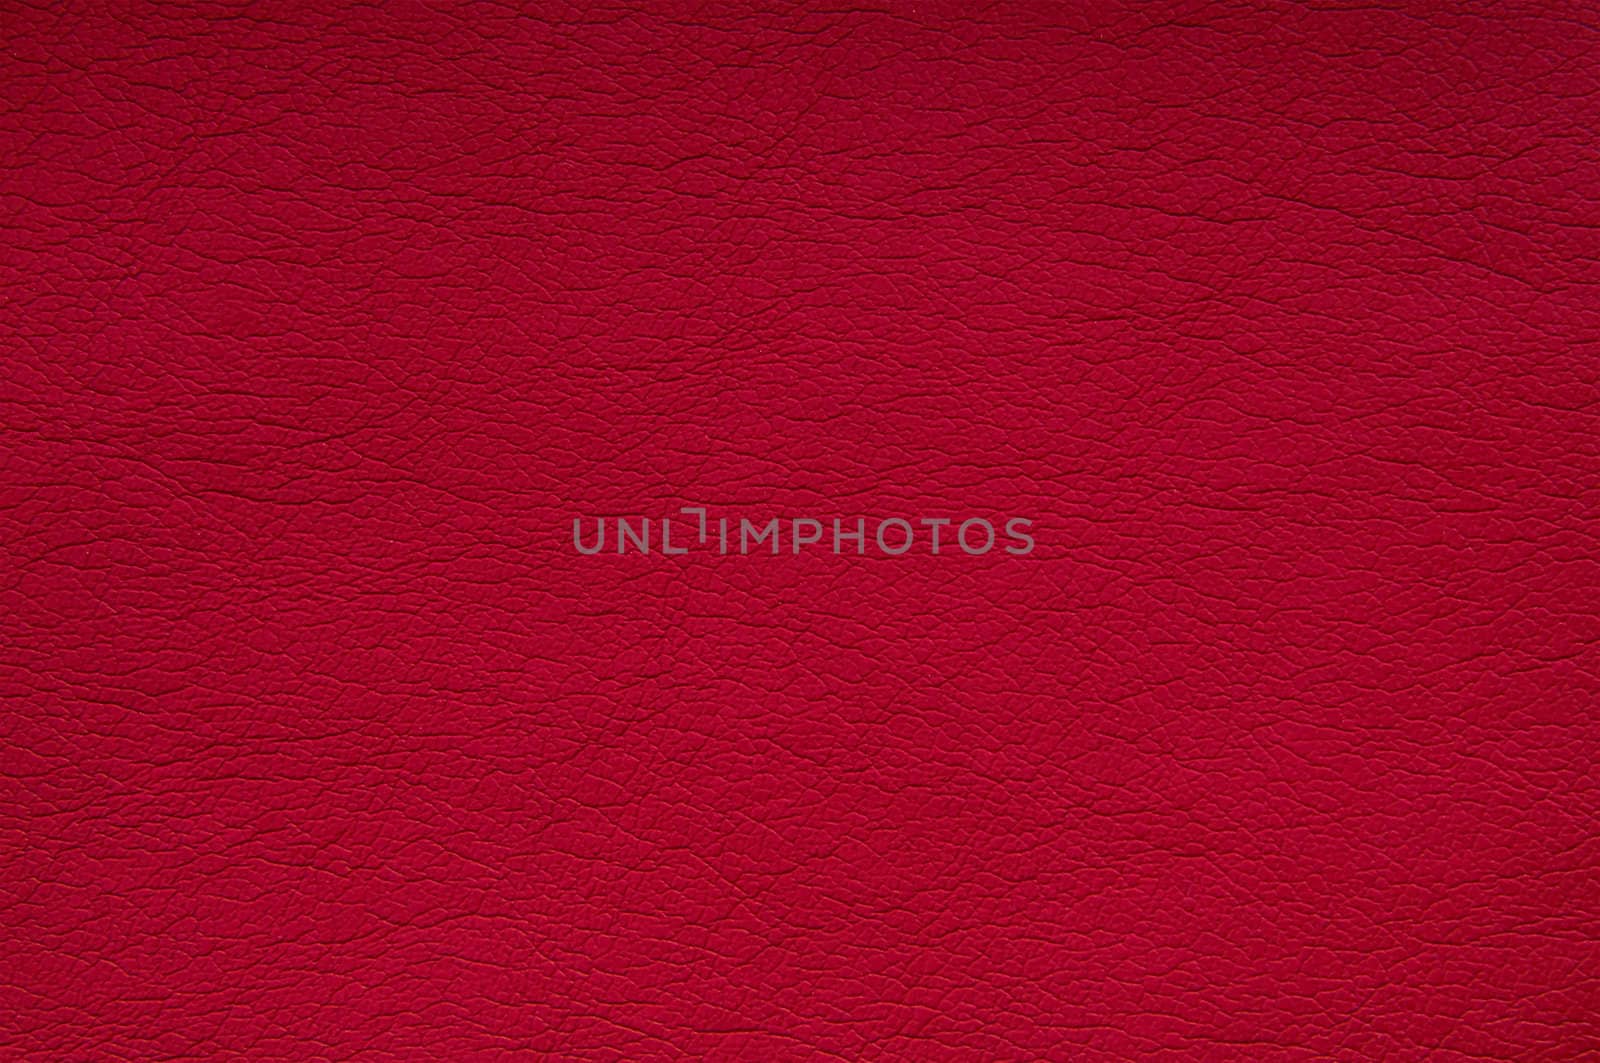 Red leather background by zeffss